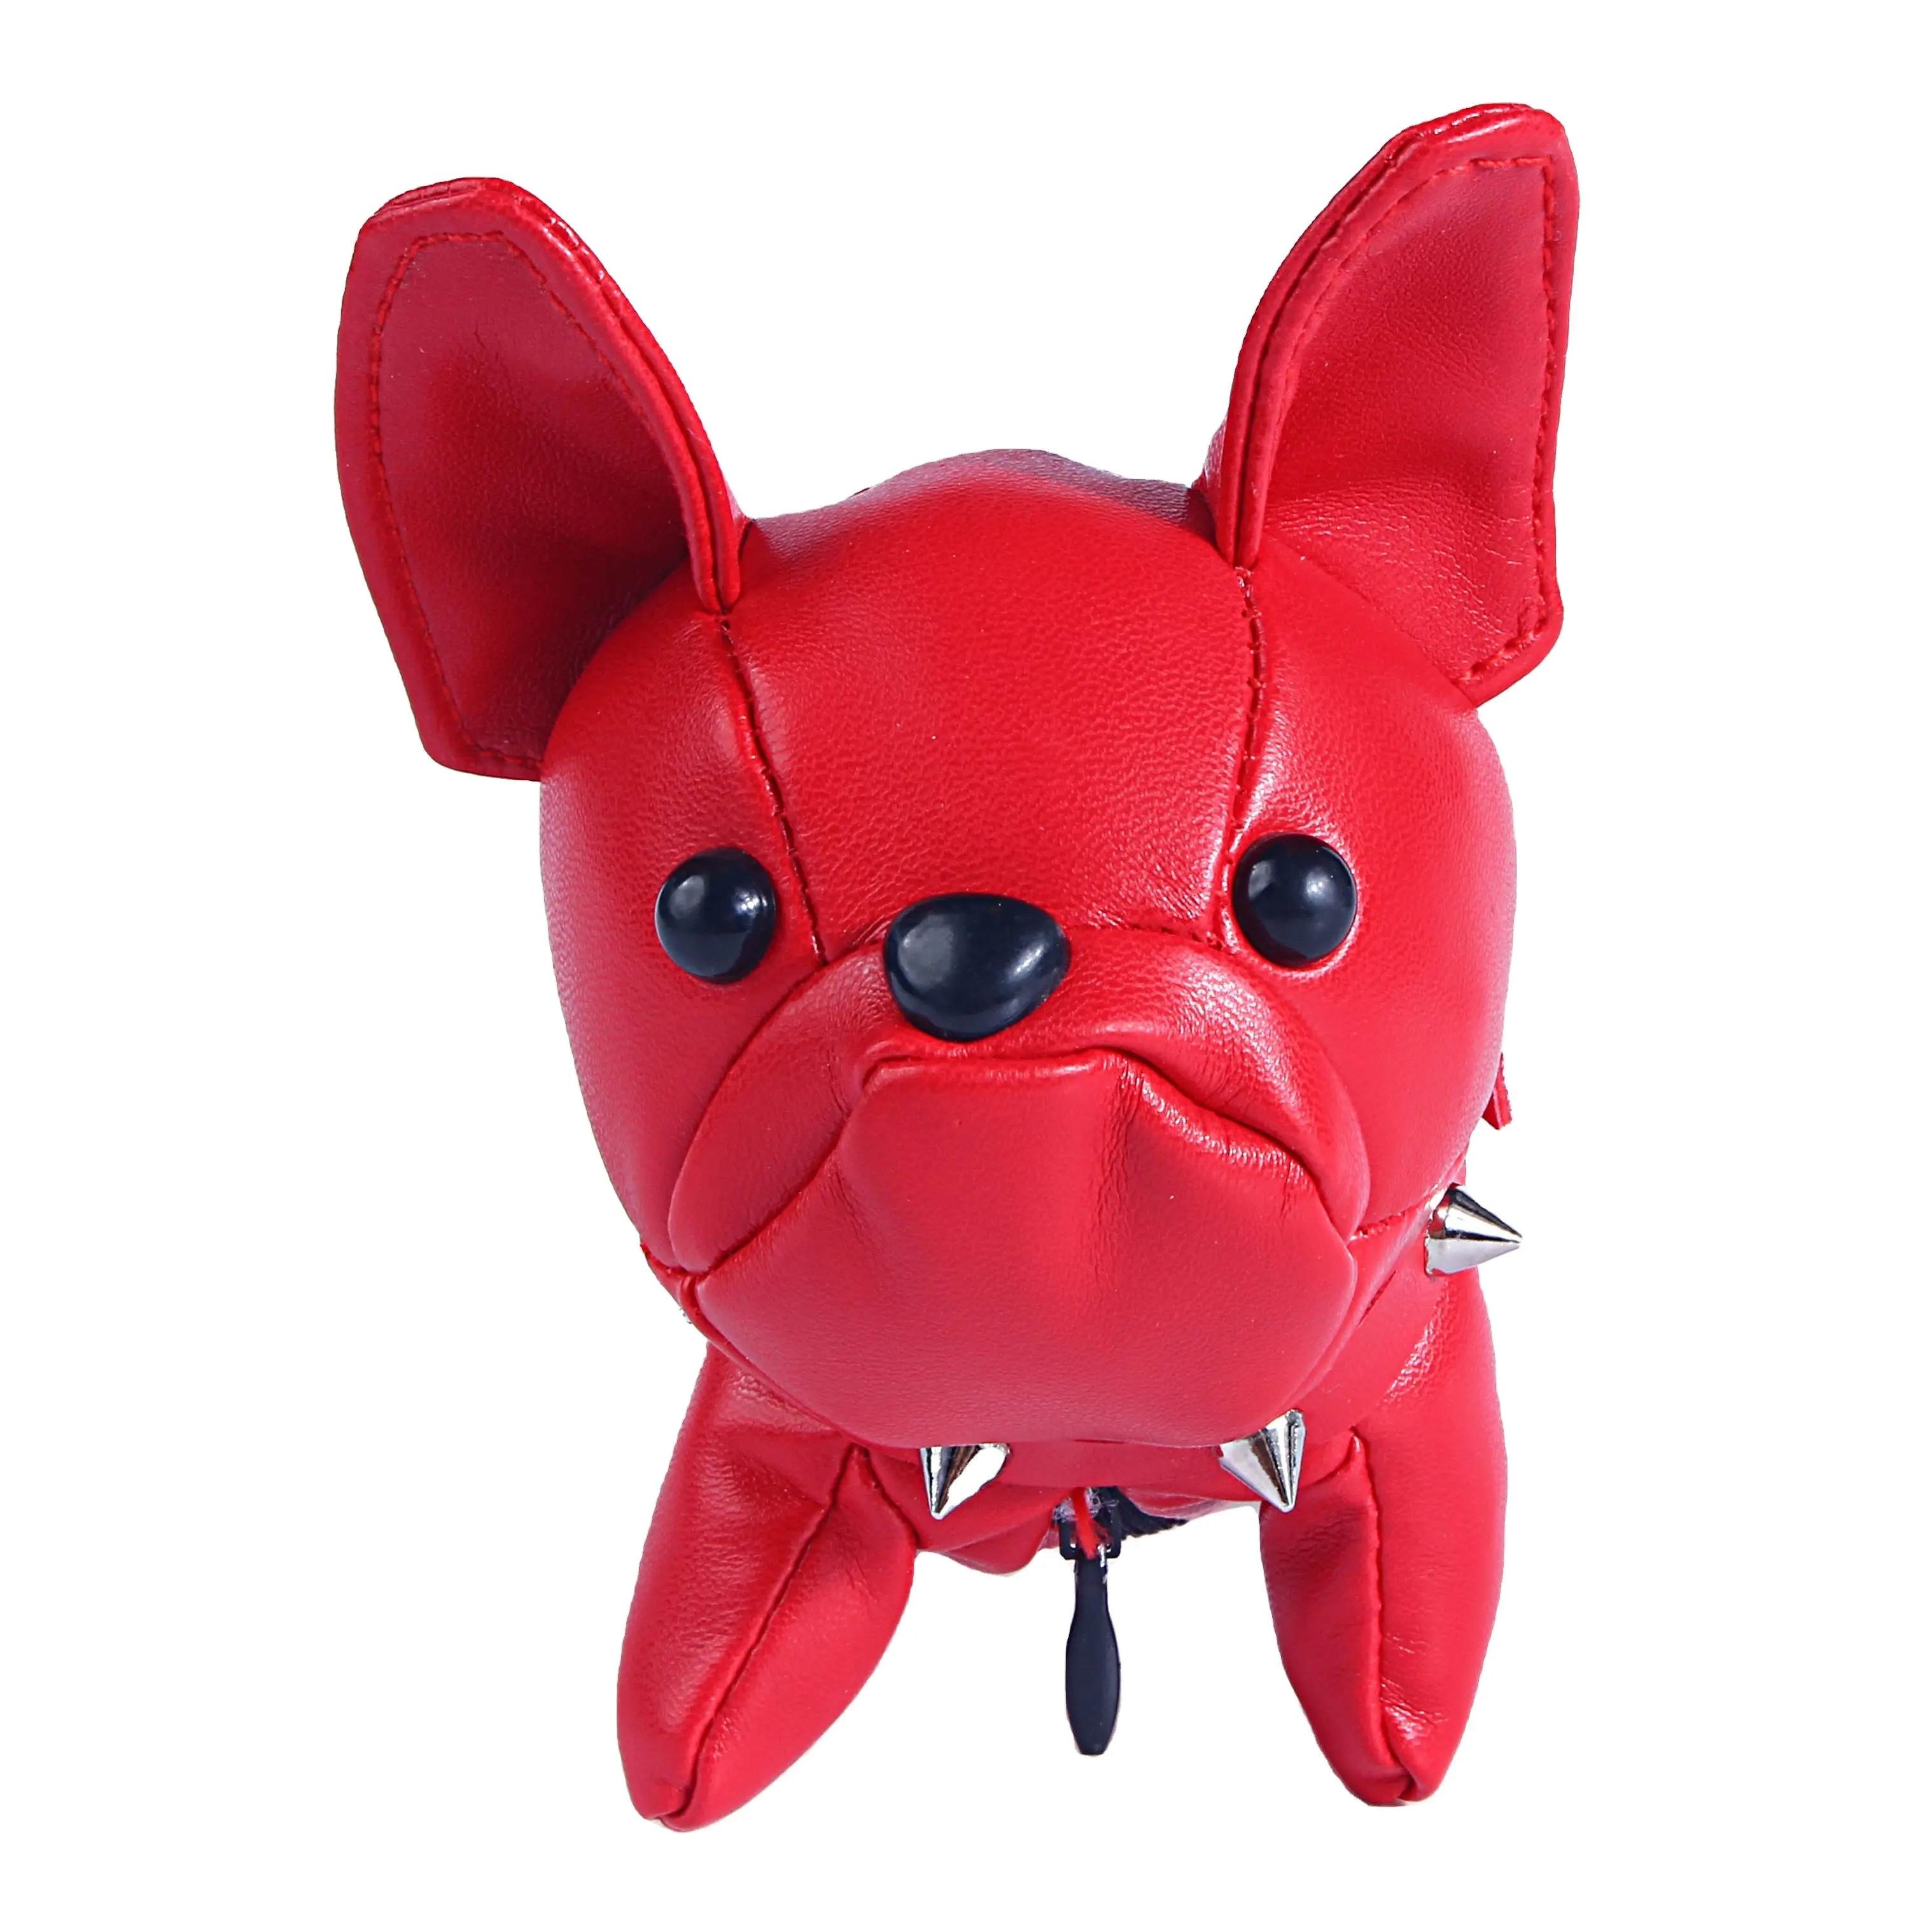 YiFan High Quality Cheap Charms Key Chain Wholesale Red Little Dog Shape Cute Key Chain For Bag